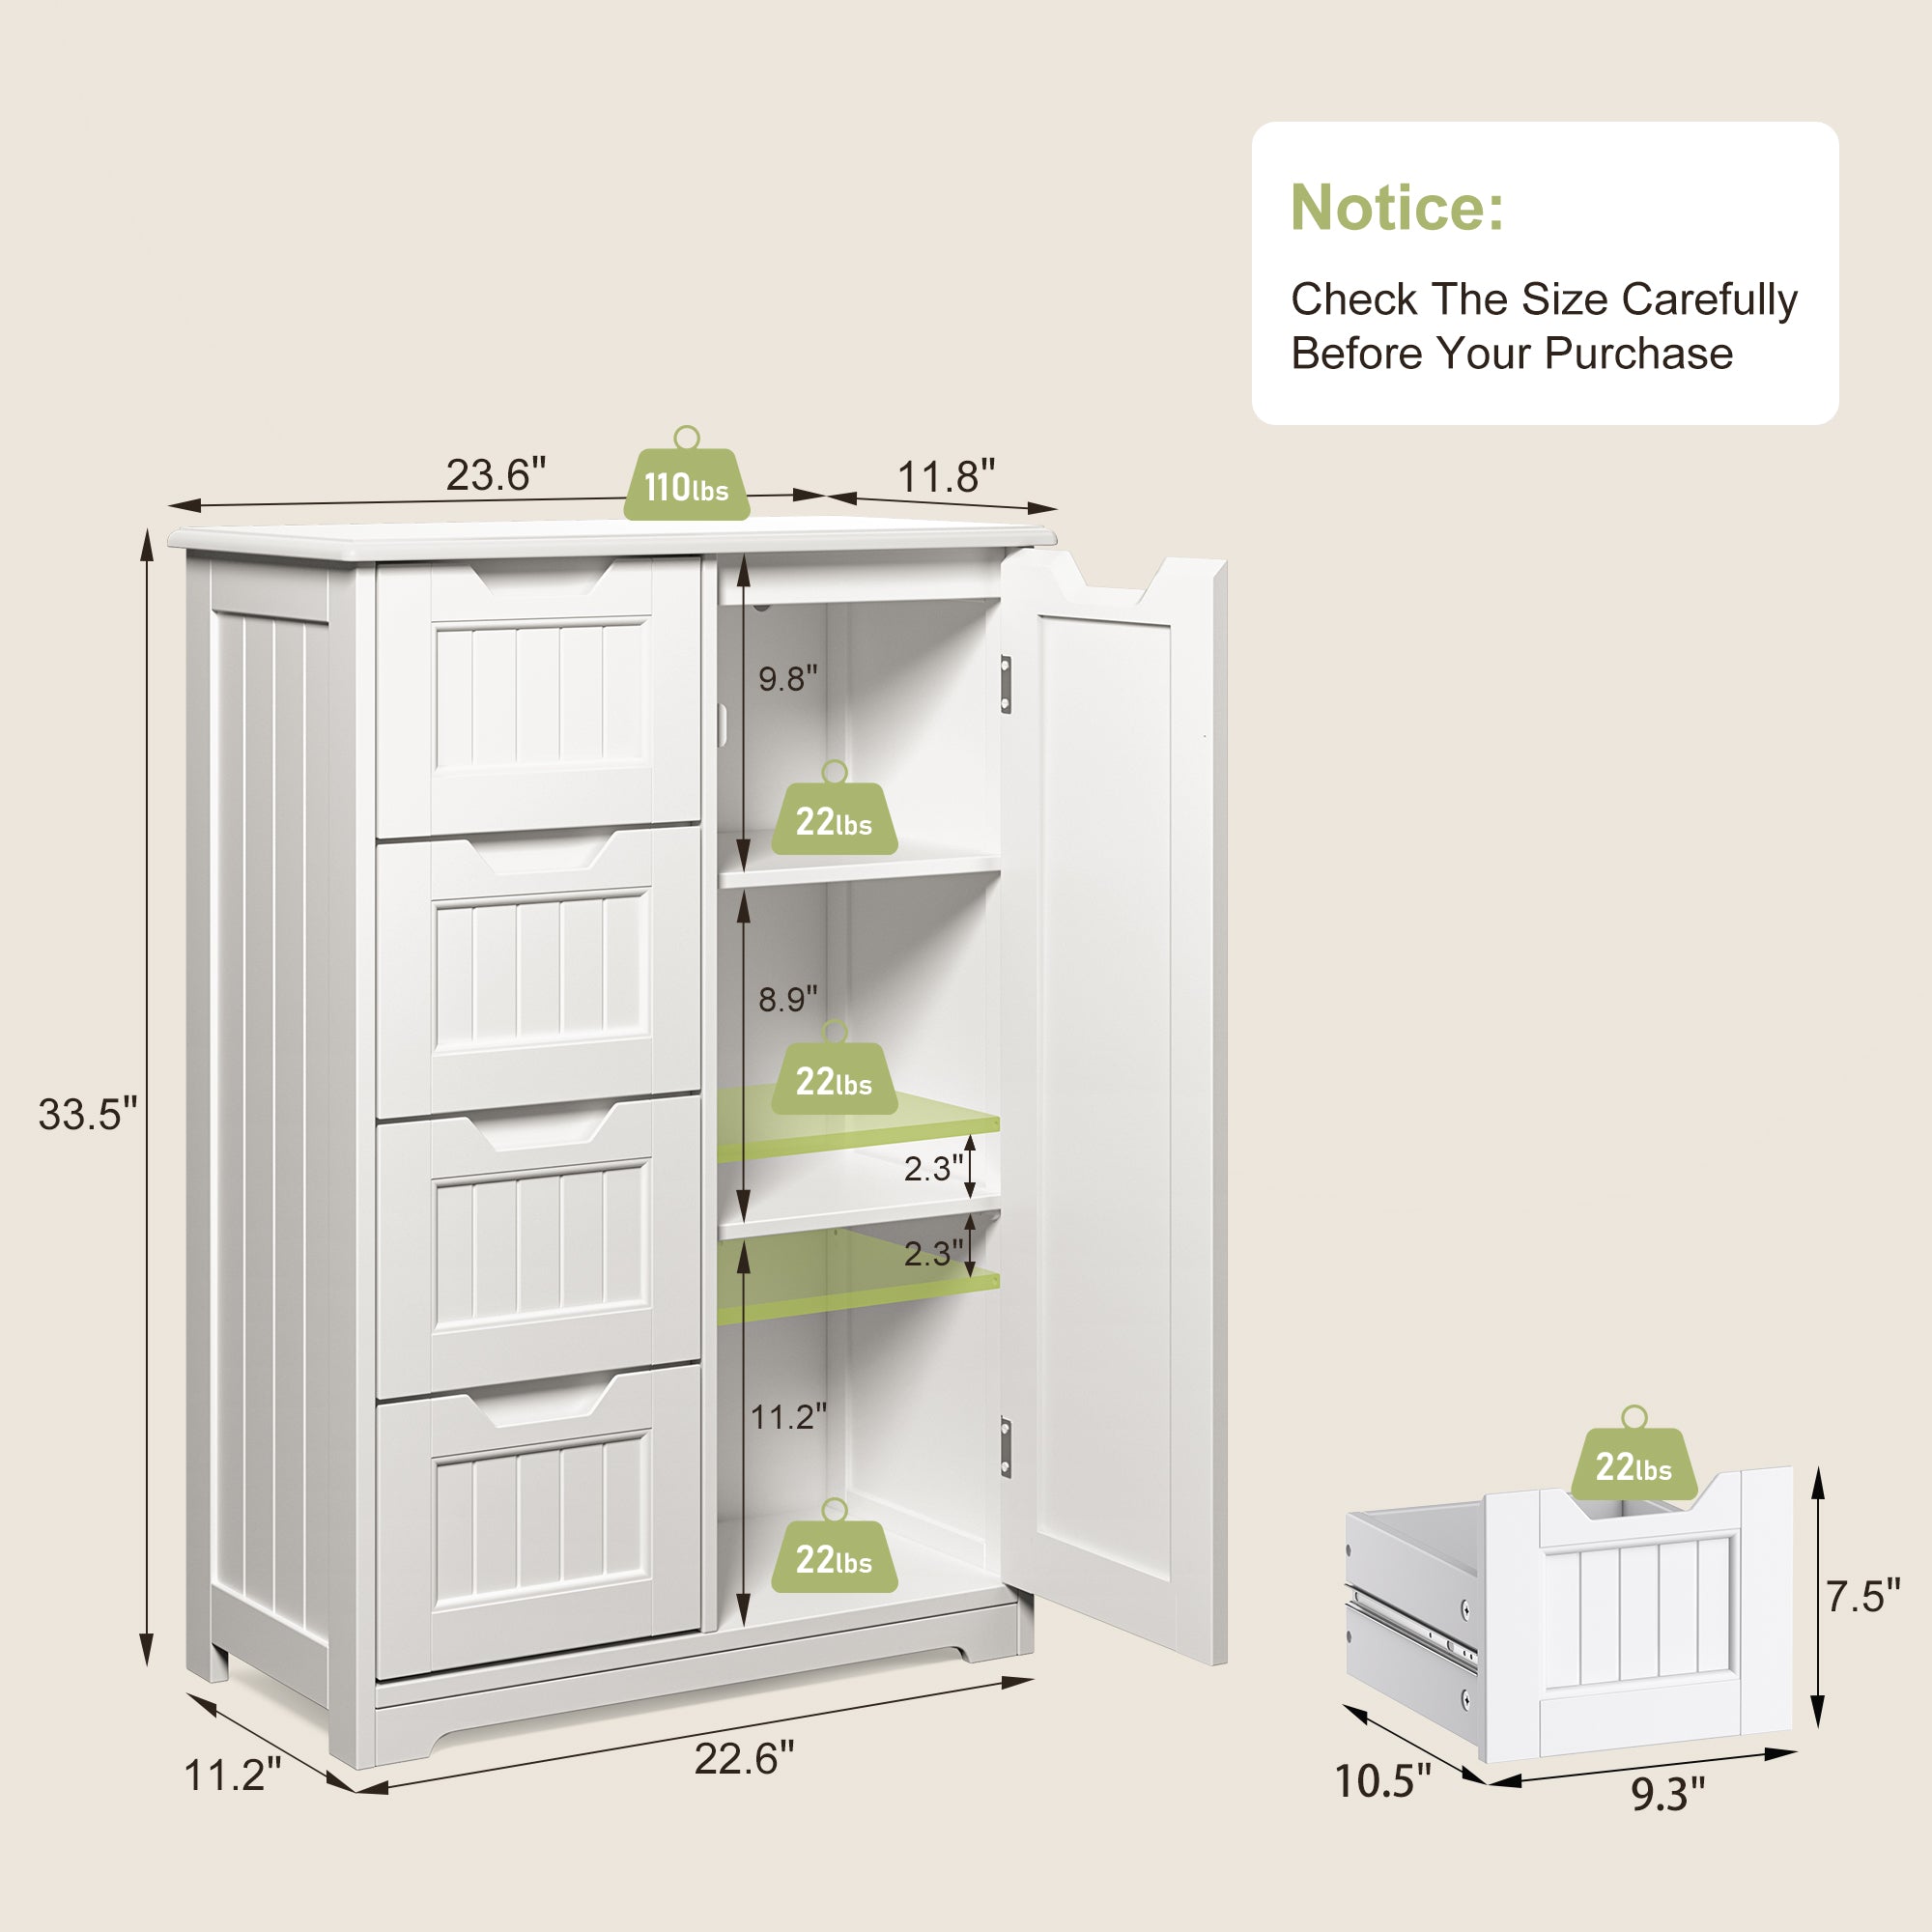 Gizoon AP26 White Modern Pantry Storage Cabinet with Door and Shelves